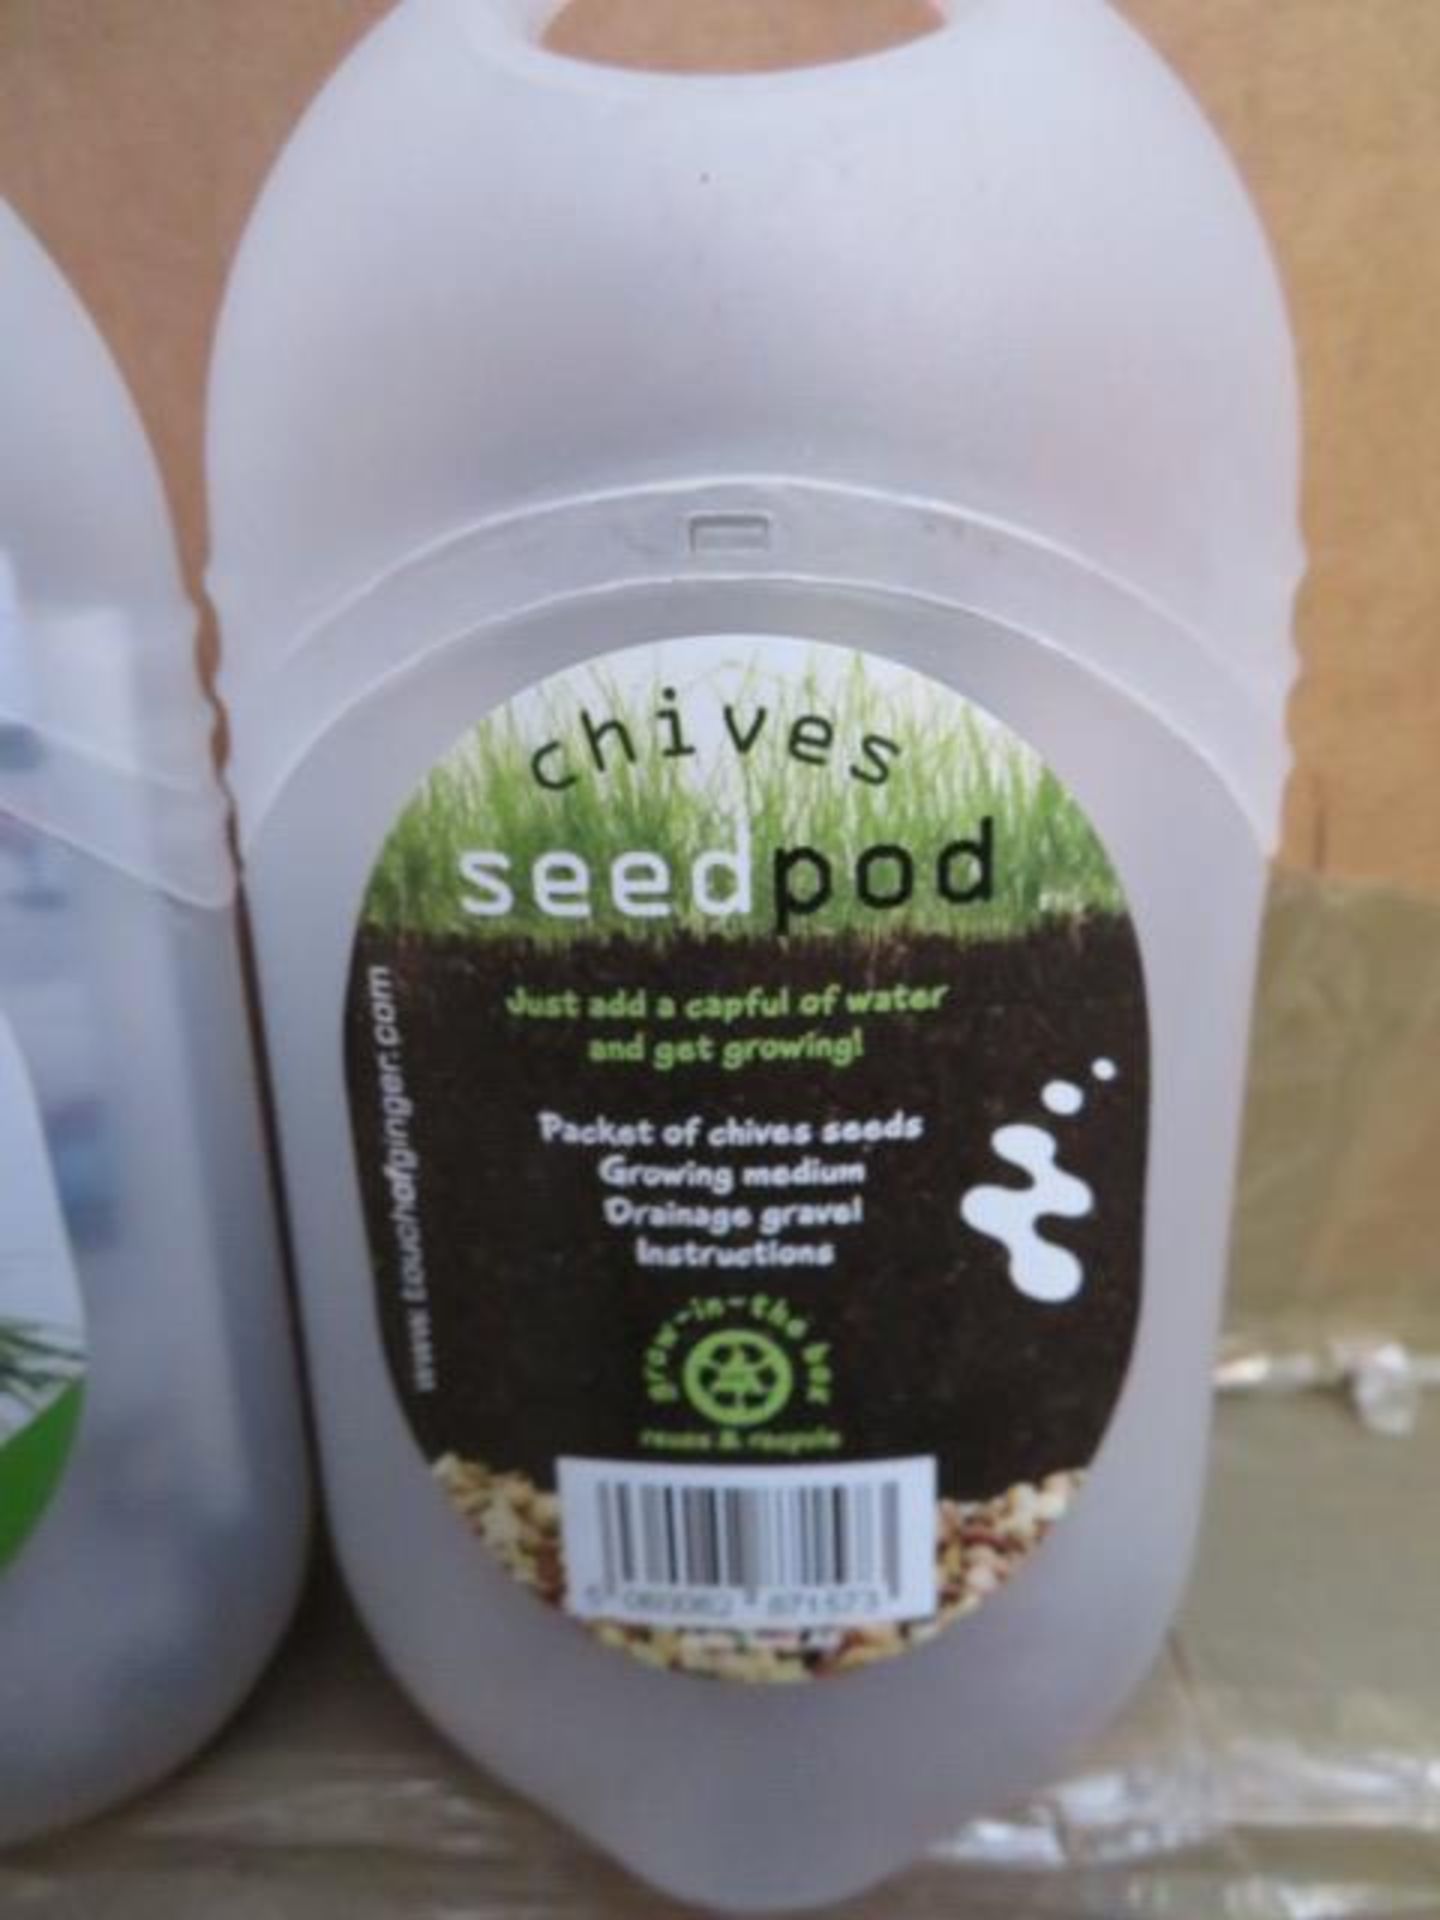 (27) PALLET TO CONTAIN APPROX. 470 x BRAND NEW SEED POTS - CHIVE GROW KIT. JUST ADD WATER. RRP ... - Image 3 of 3